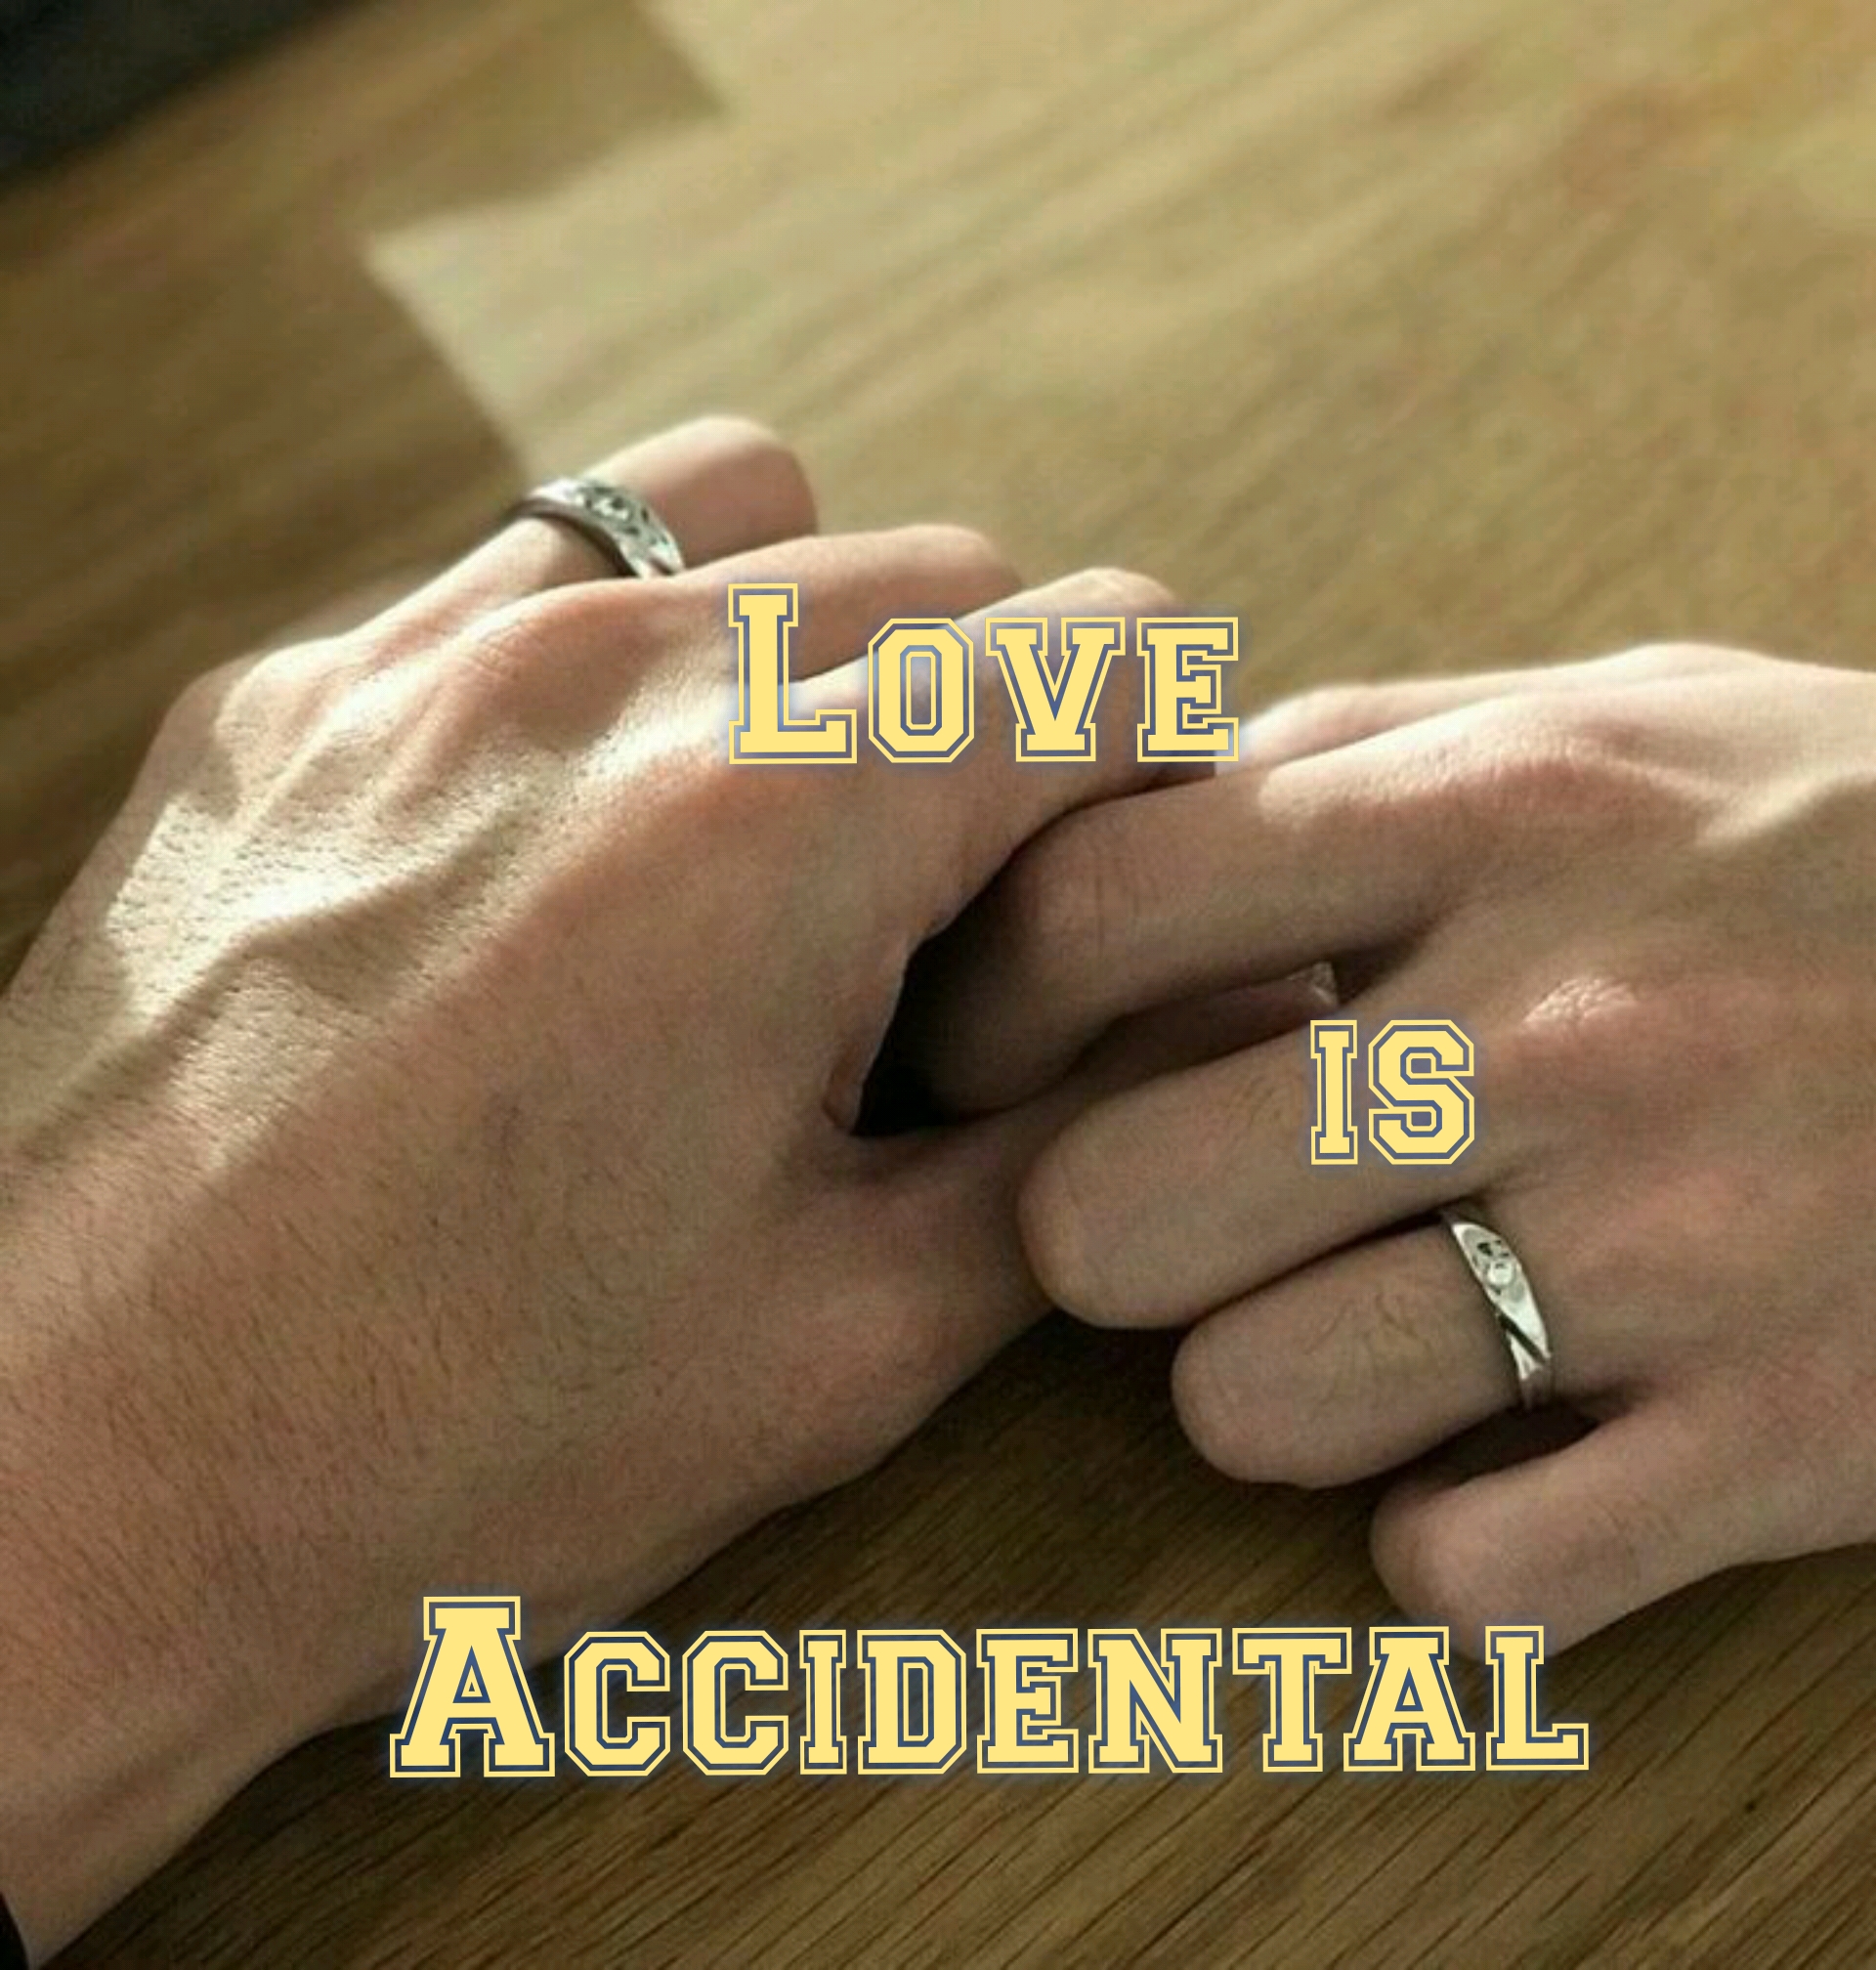 Love is Accidental